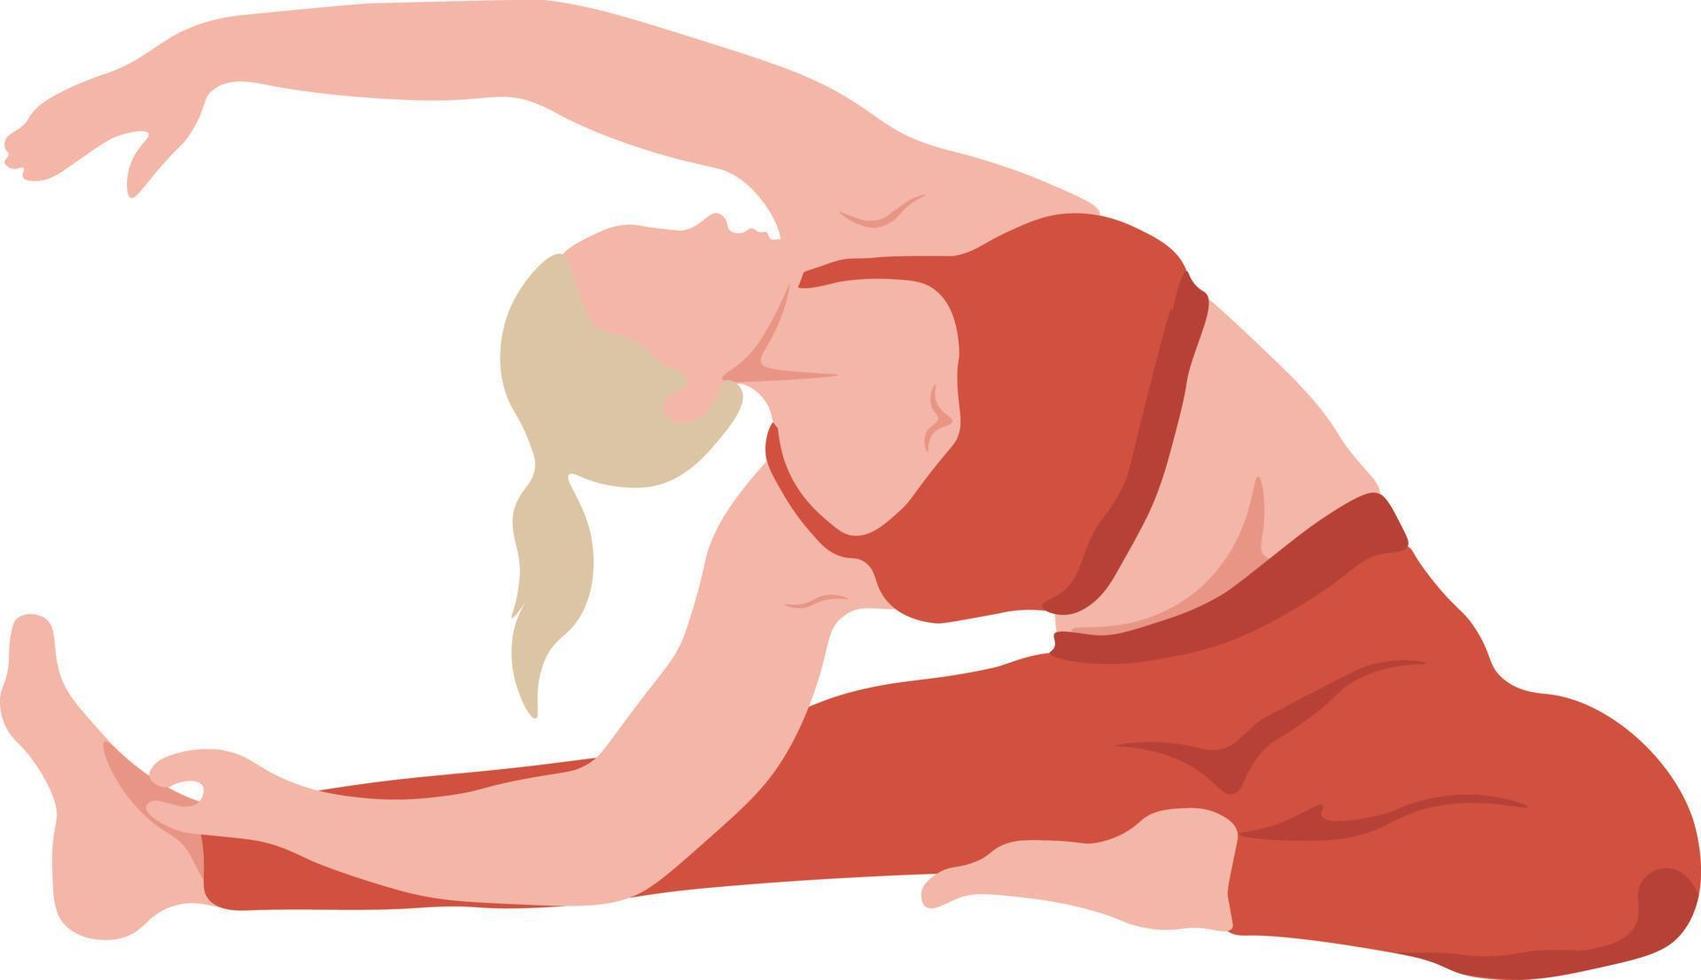 Yoga time concept, beautiful woman doing yoga exercise vector illustration. Healthy lifestyle concept